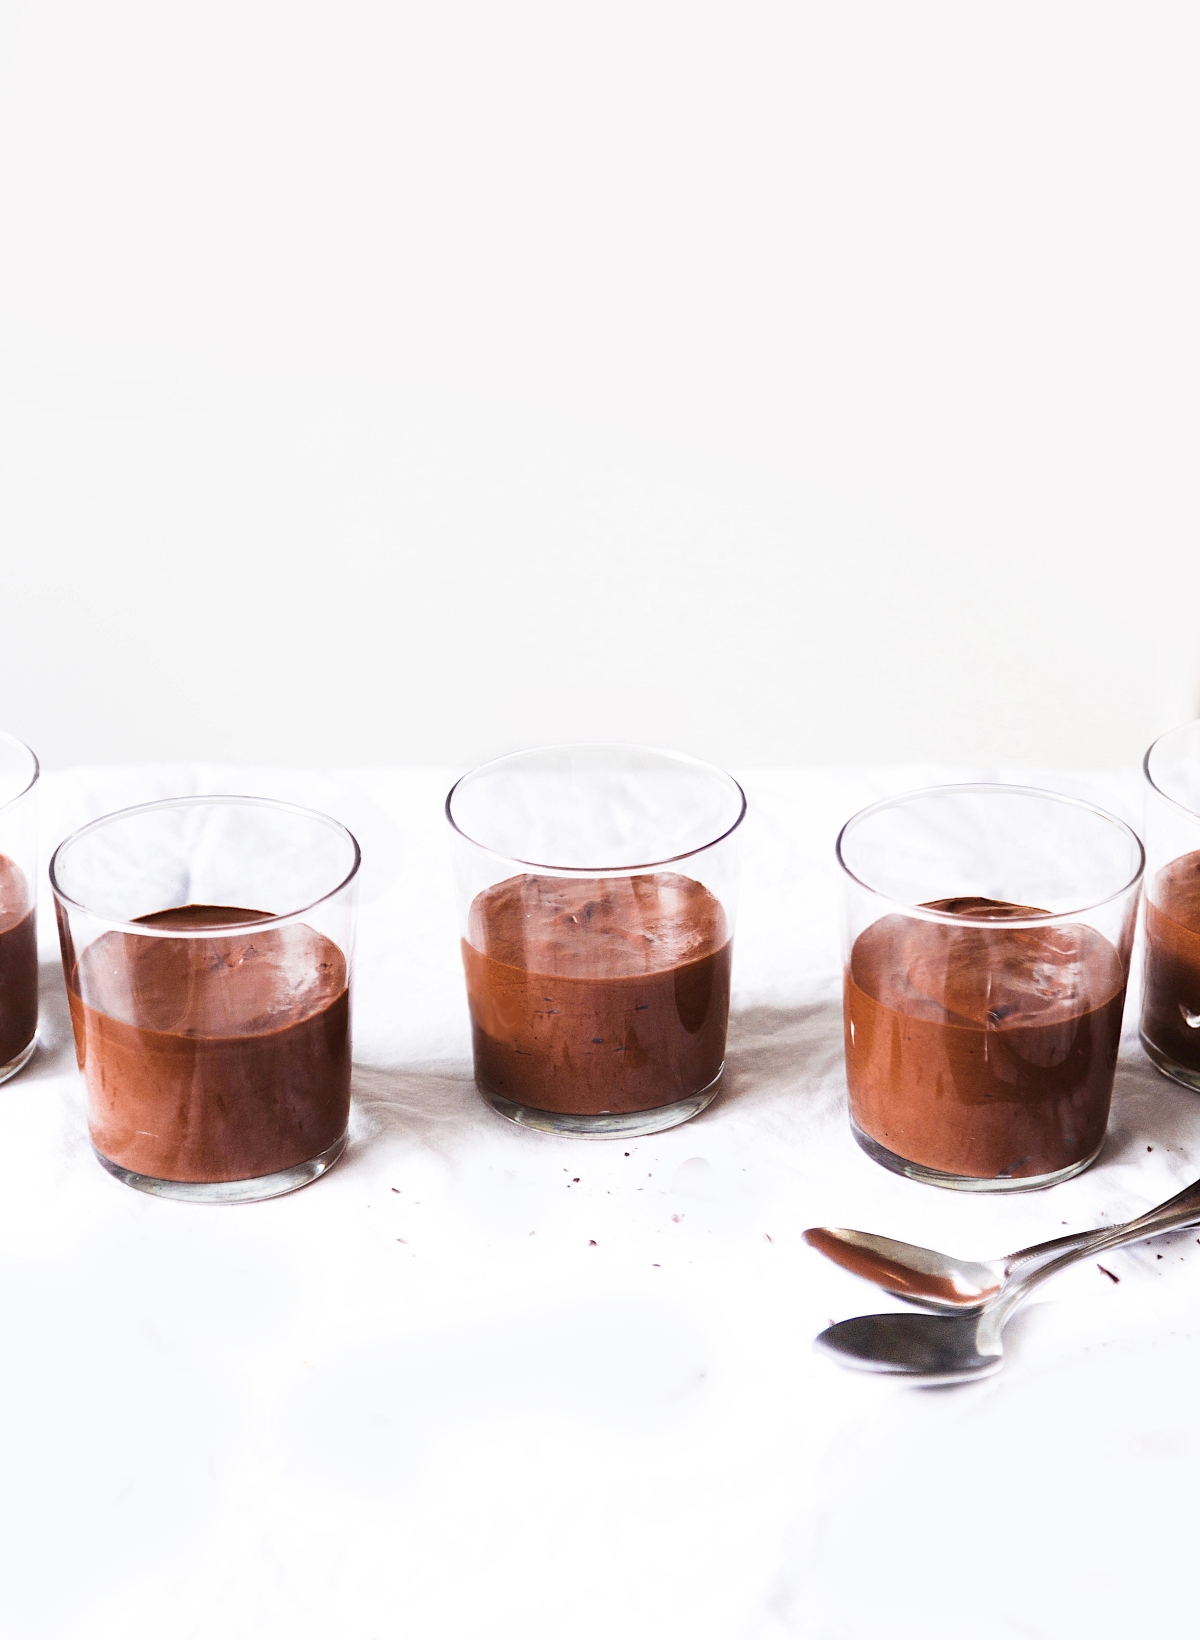 Chocolate Mousse Final 1-3.jpg